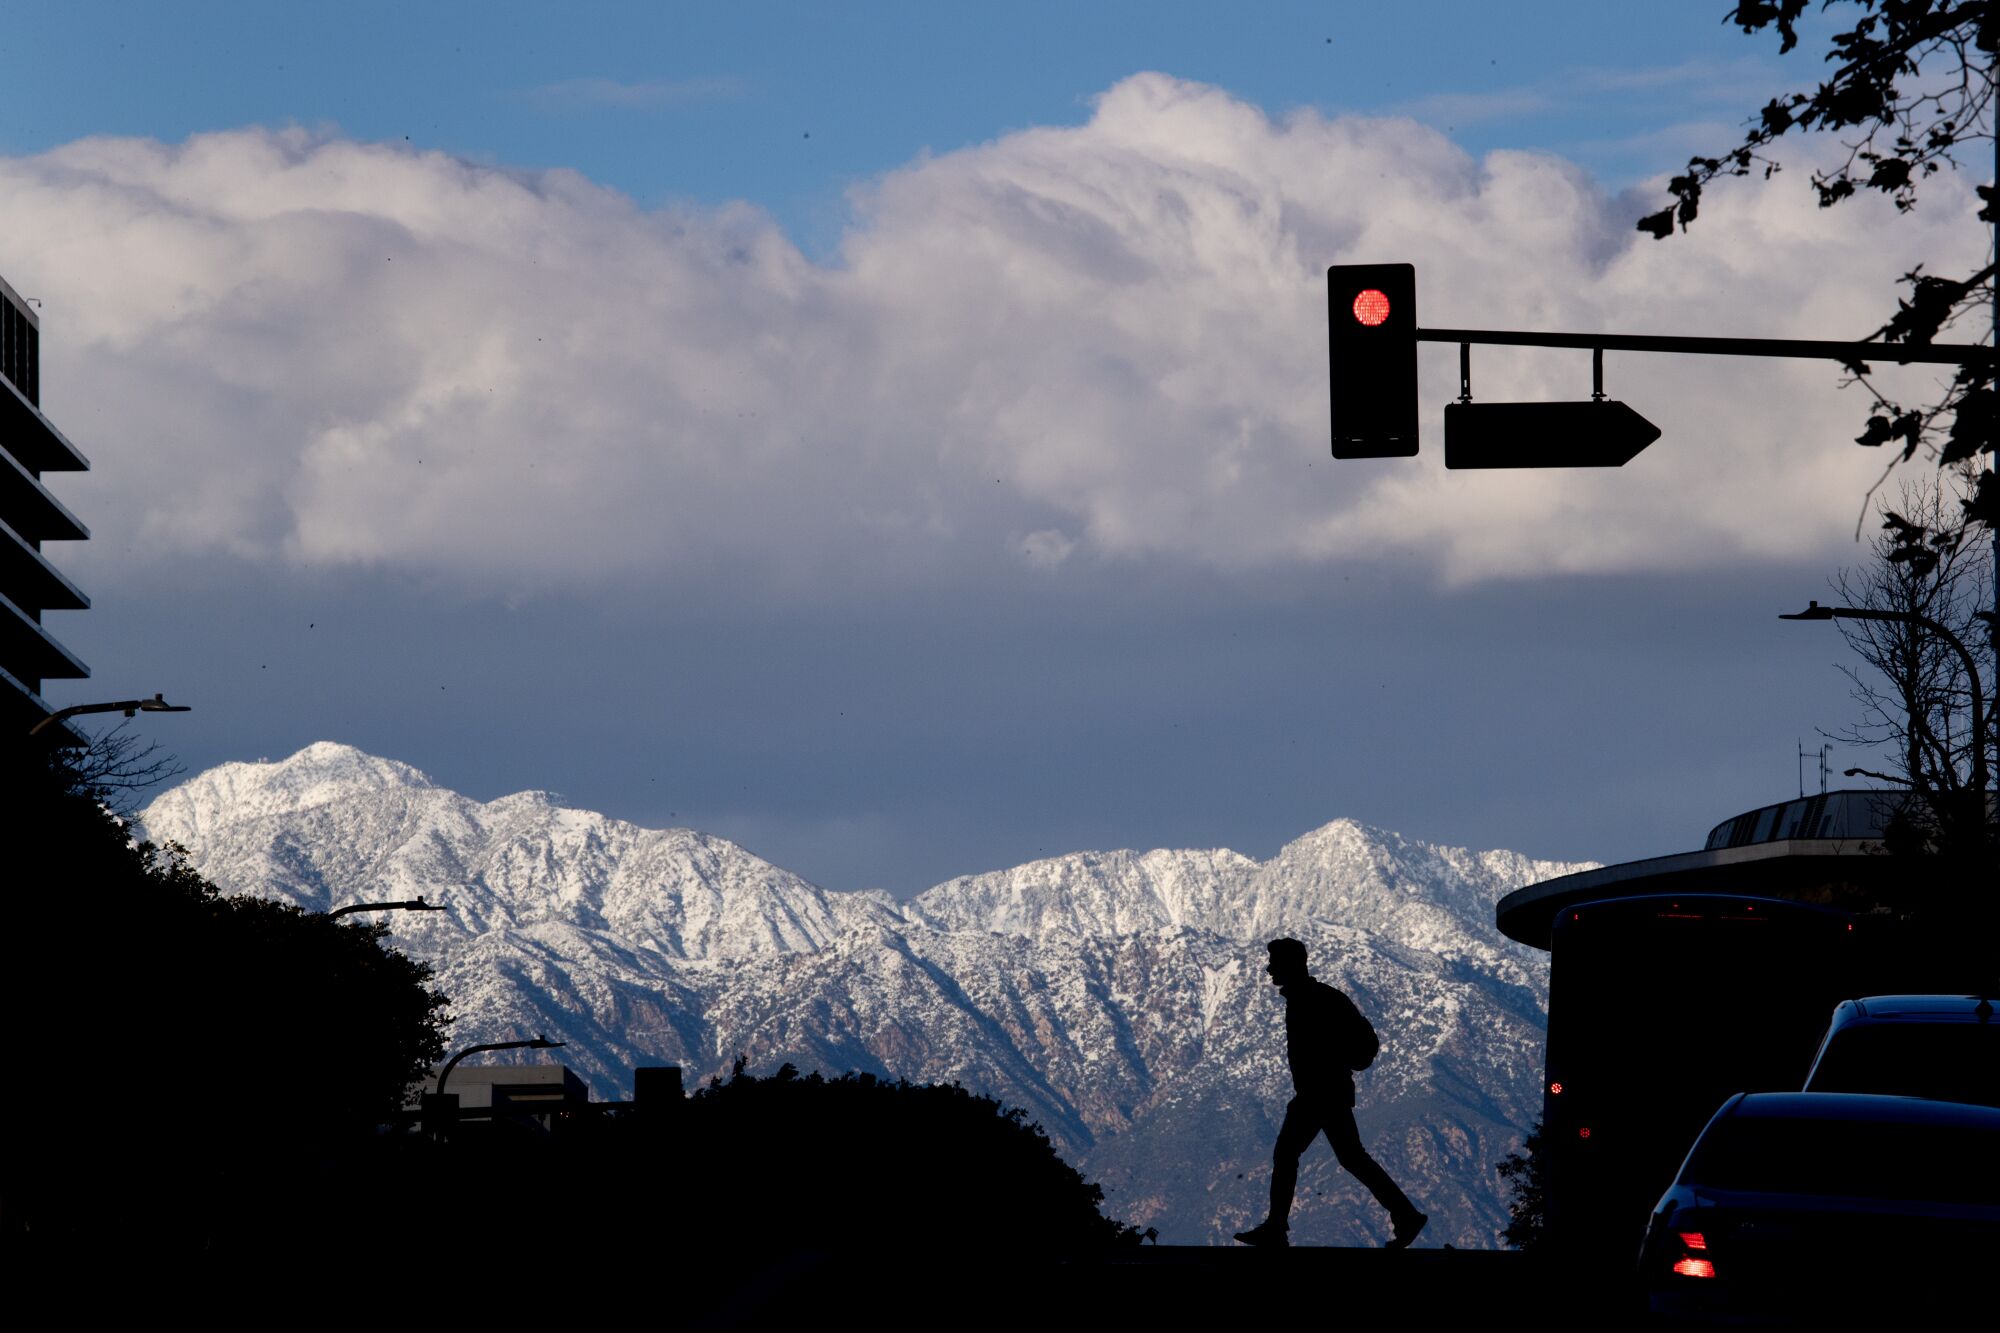 A pedestrian, crossing a street in downtown Los Angeles, is silhouetted against the snow-capped San Gabriel Mountains 